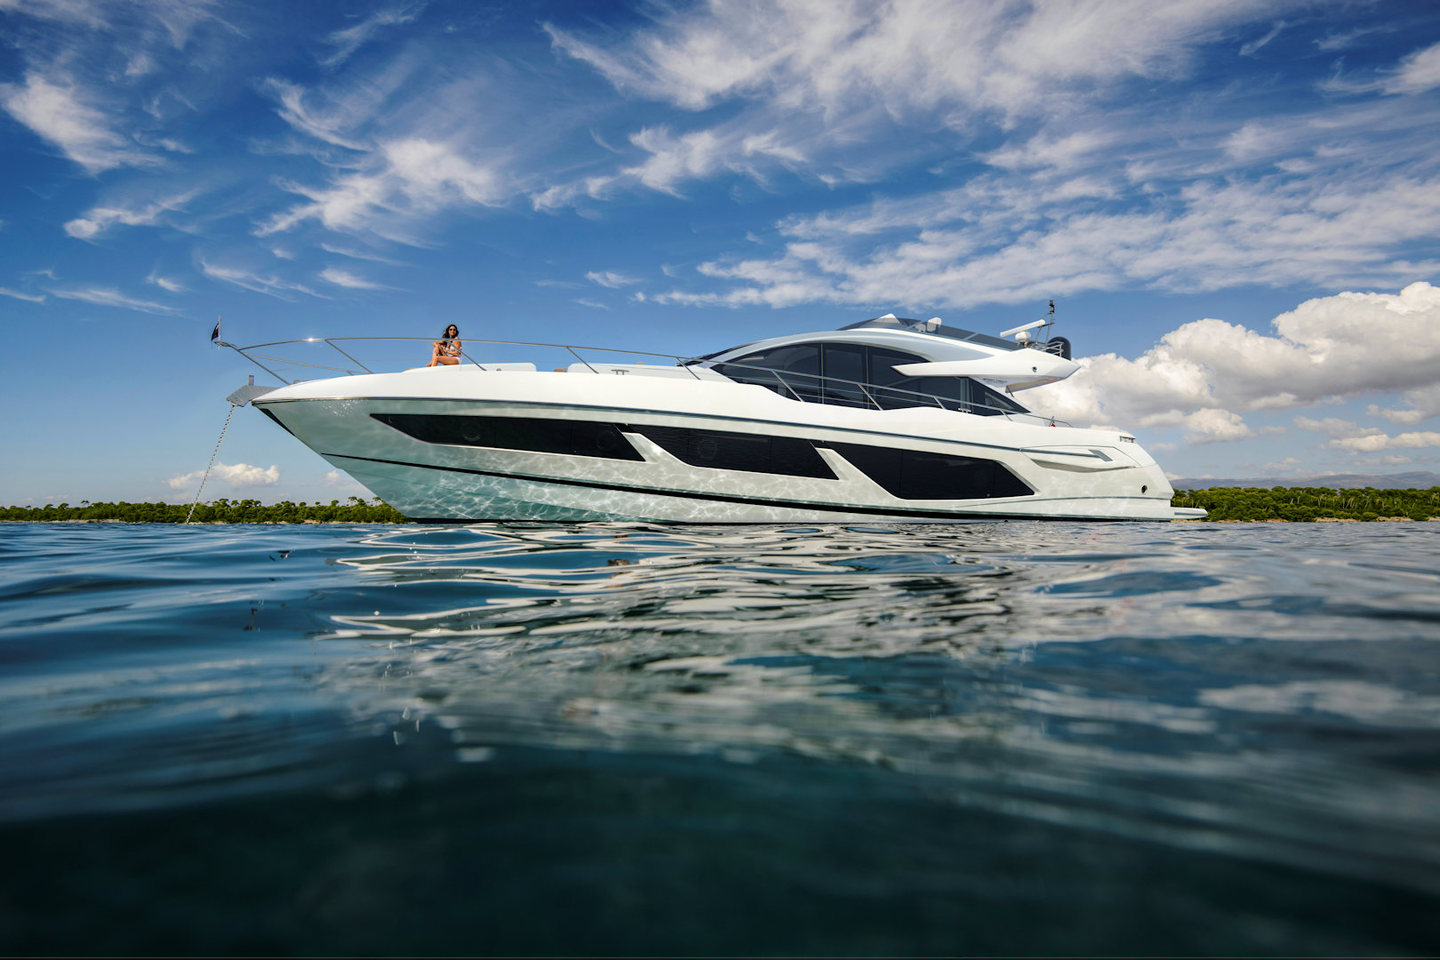 360 VR Virtual Tours of the Sunseeker 74 Sport Yacht